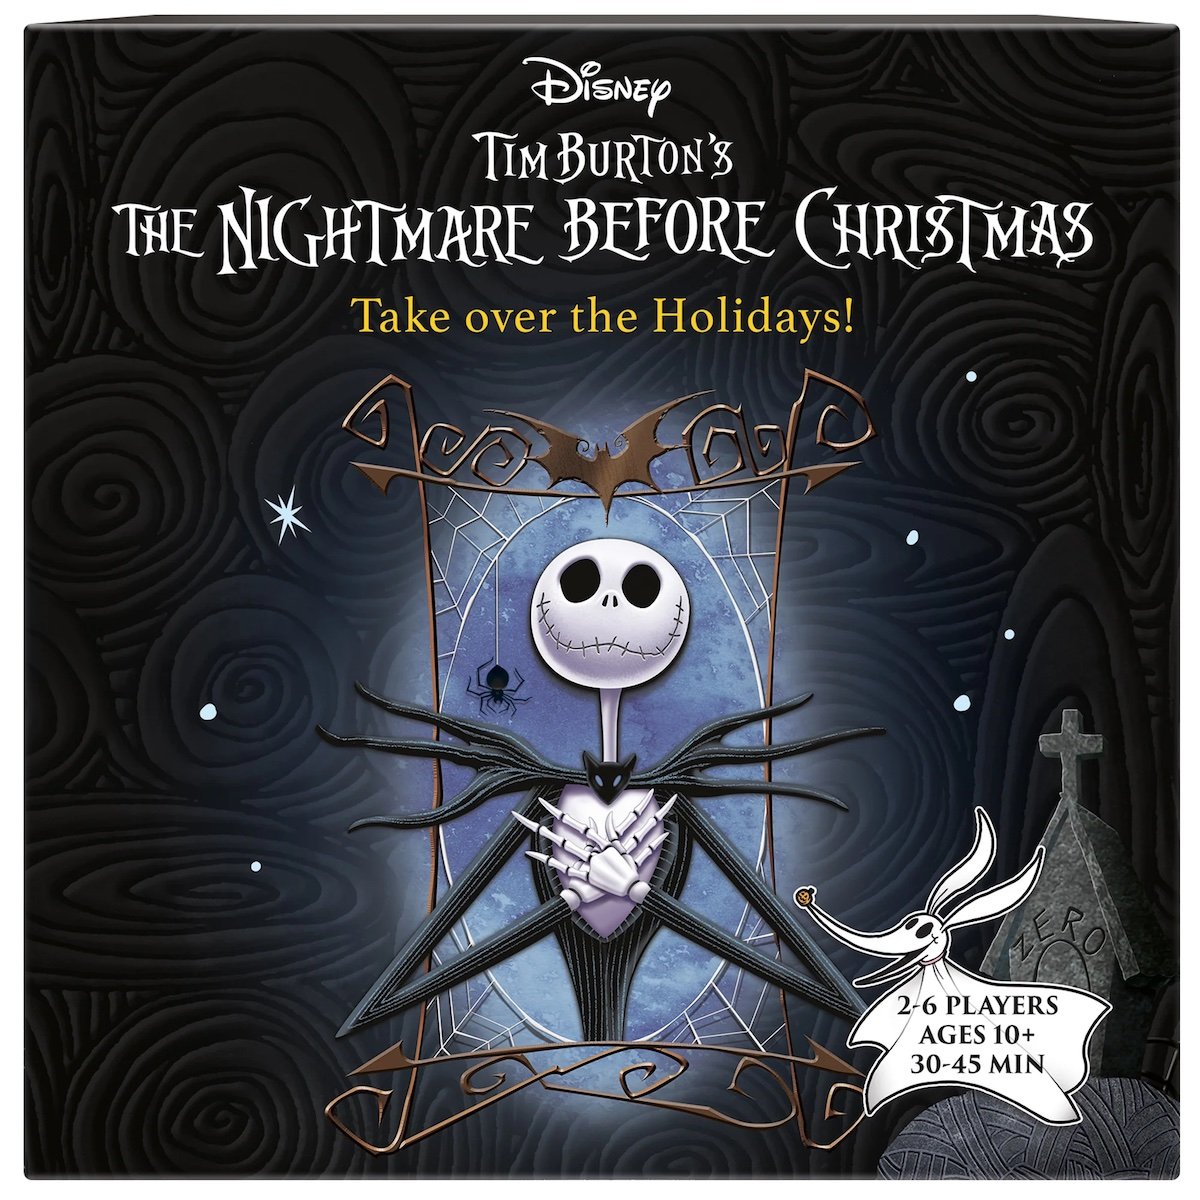 Jack Skellington on the black and blue cover of a The Nightmare Before Christmas board game